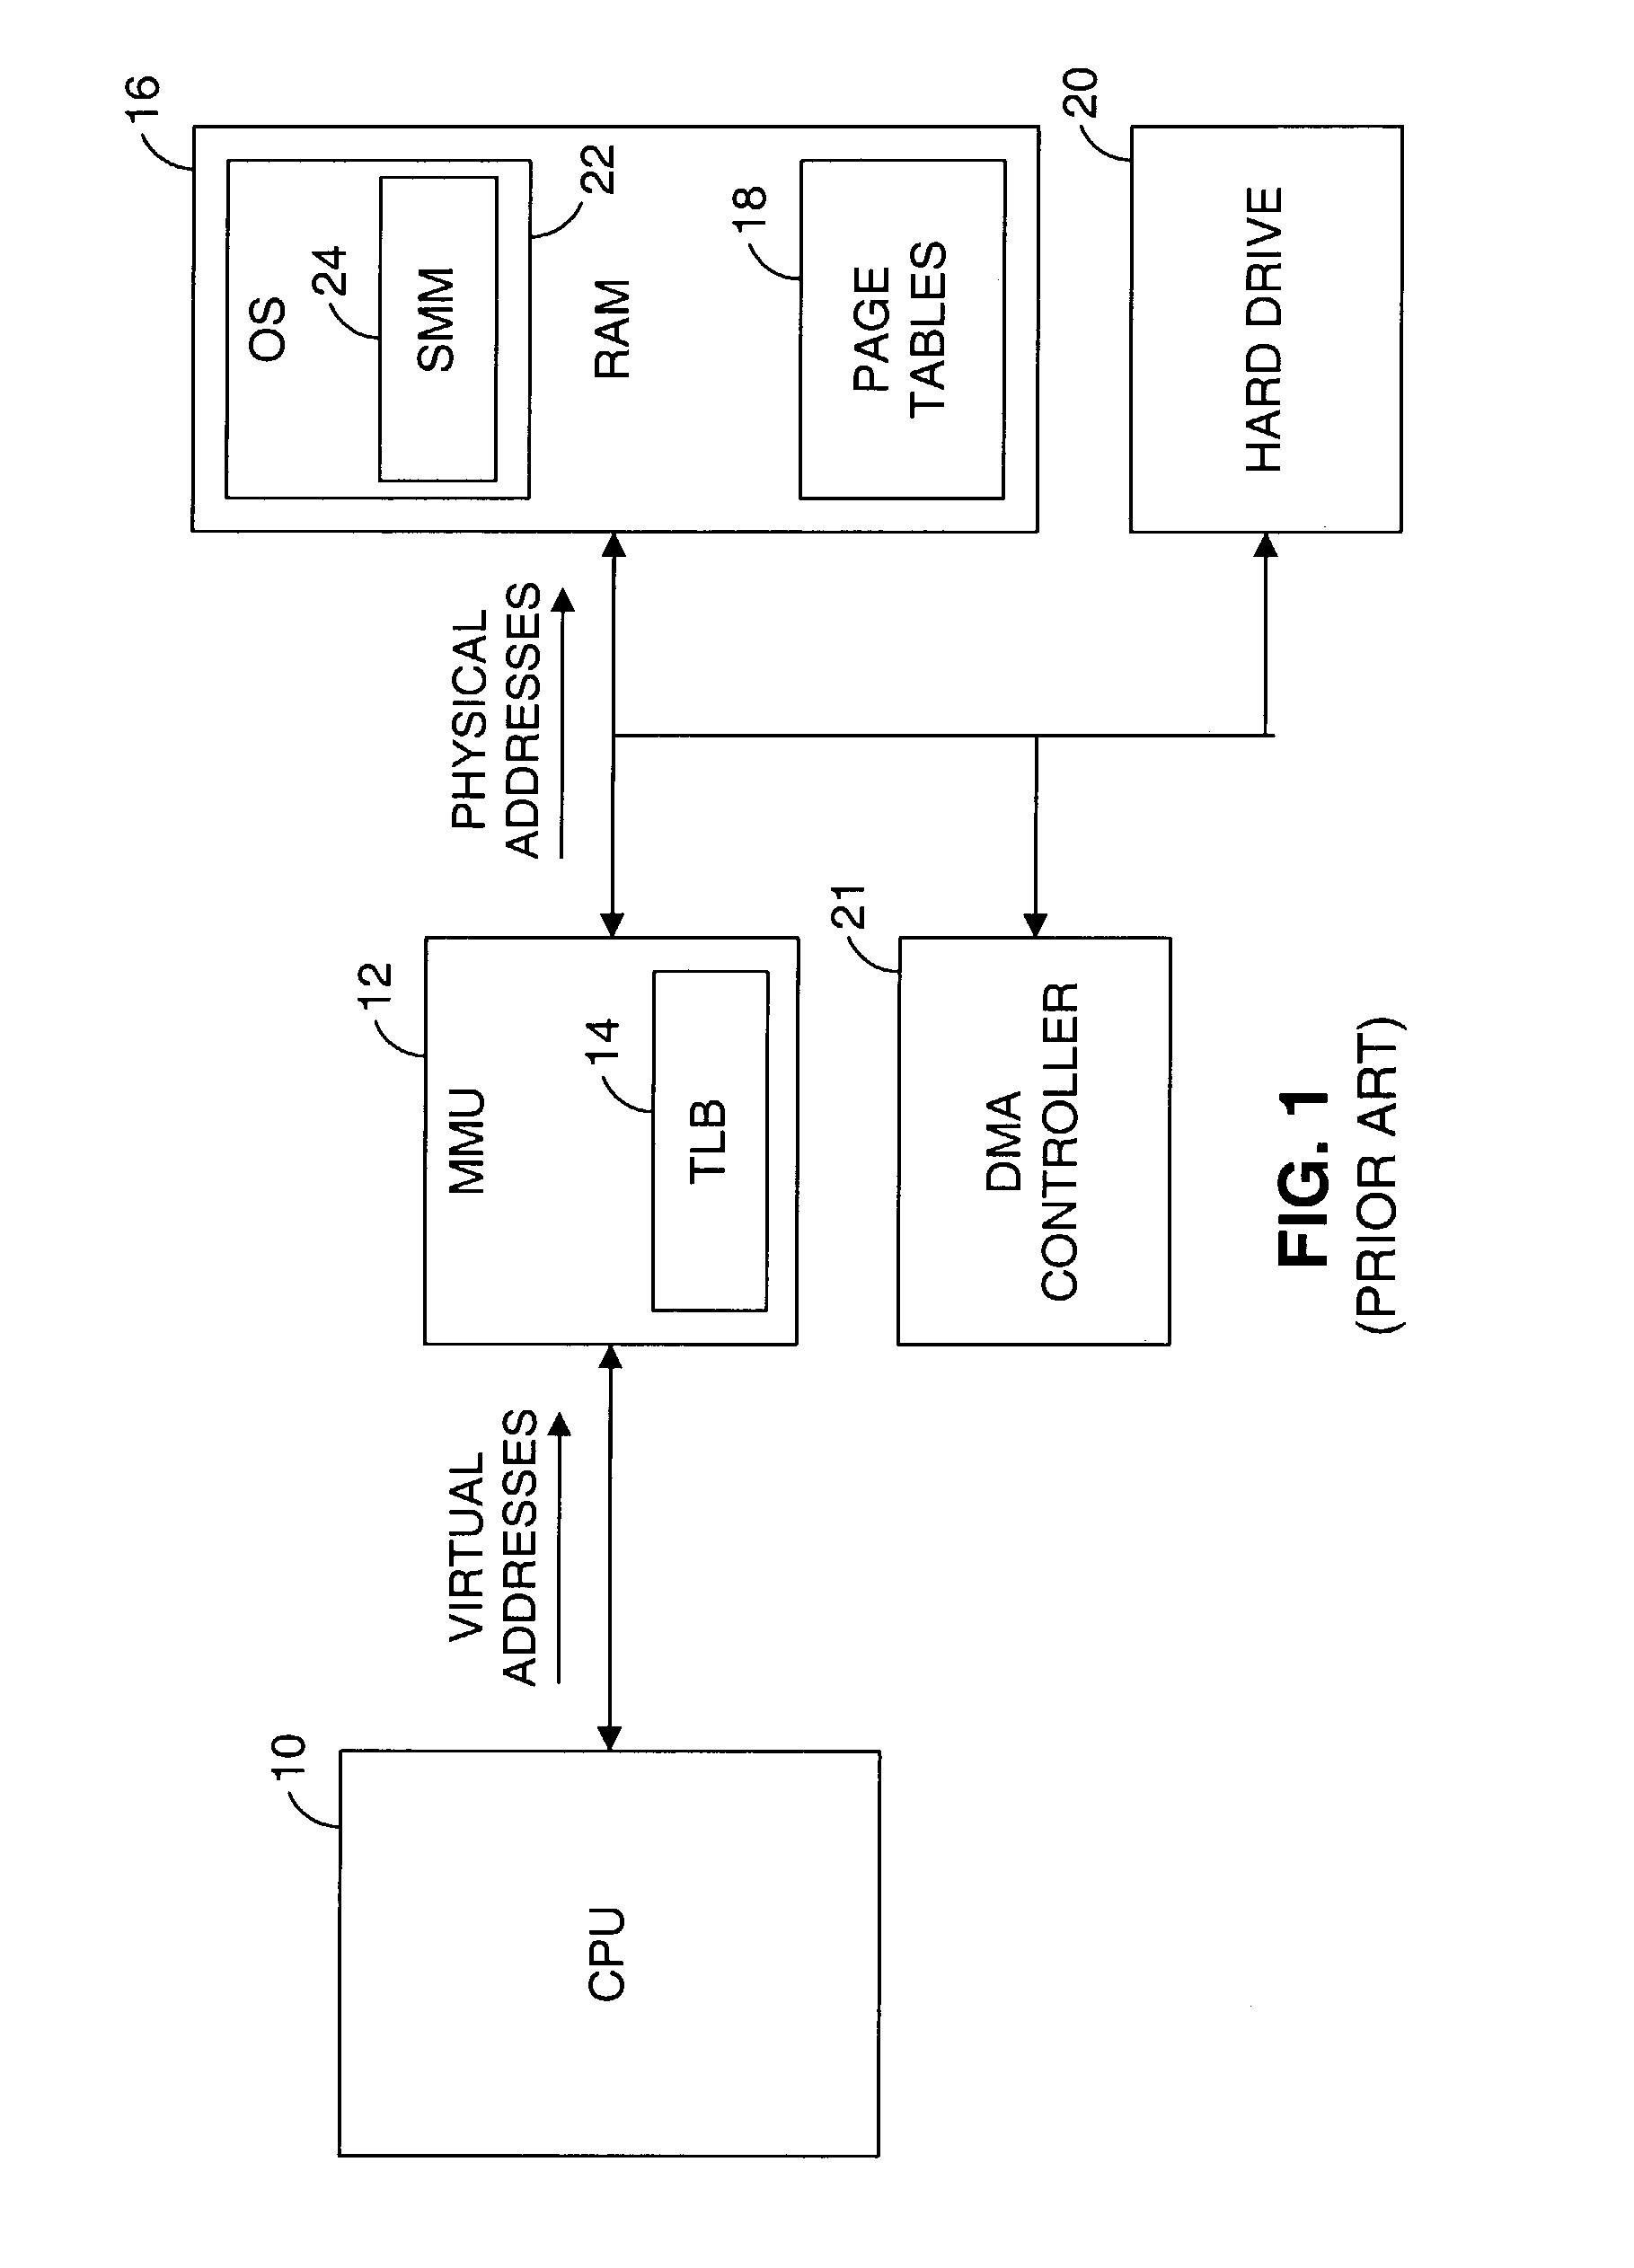 Method and system for performing virtual to physical address translations in a virtual machine monitor